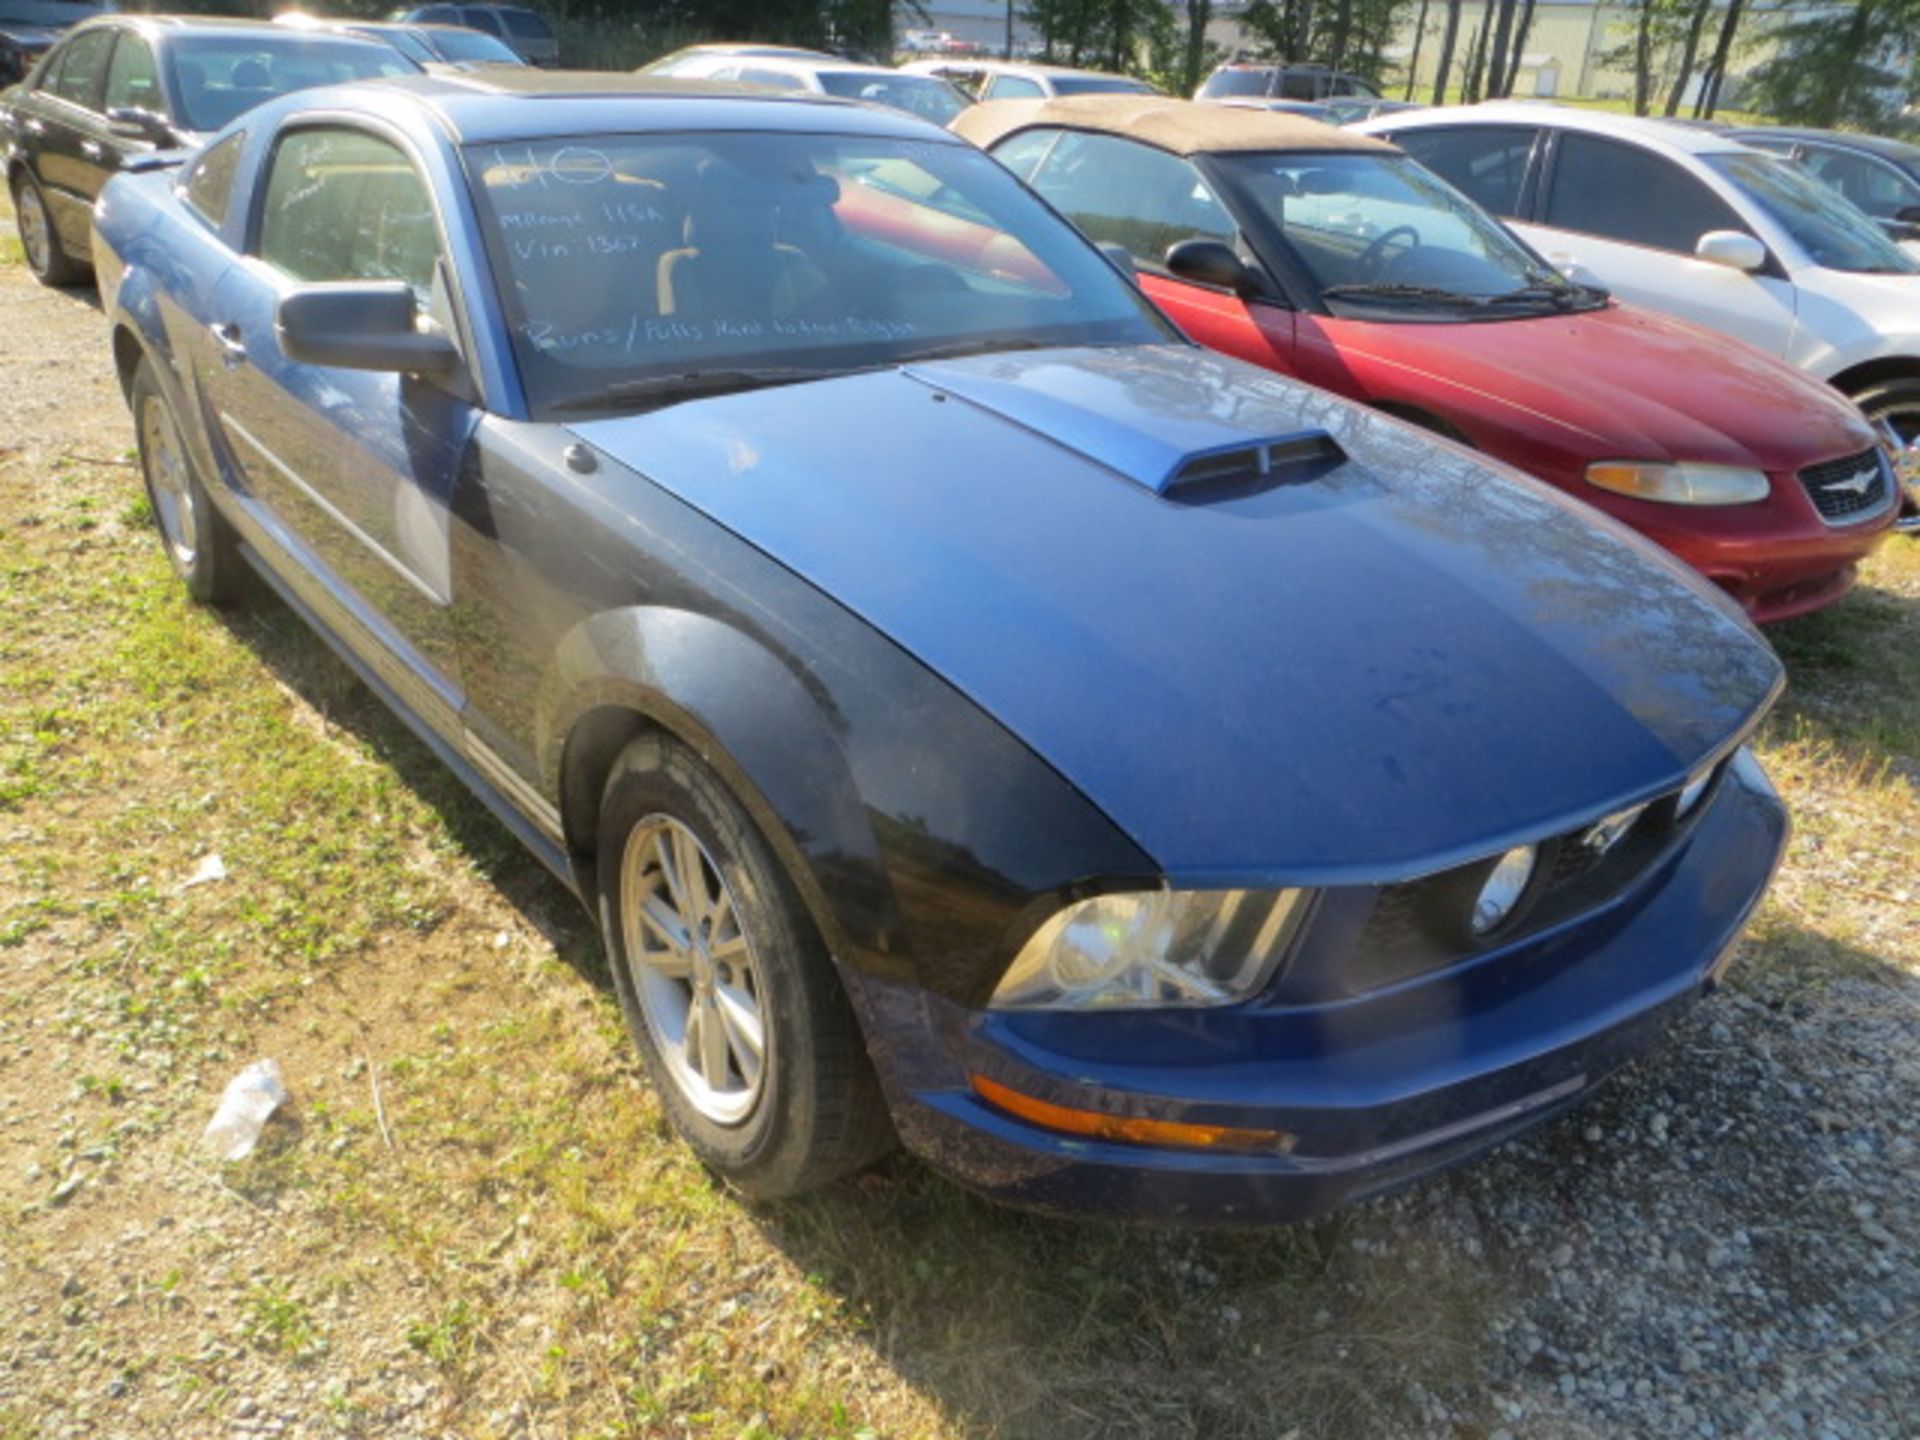 2008 Ford Mustang-NEEDS ALIGNMENT 115000 MILES,VIN 1ZVHT80N385181367, SOLD WITH TRANSFERABLE TITLE